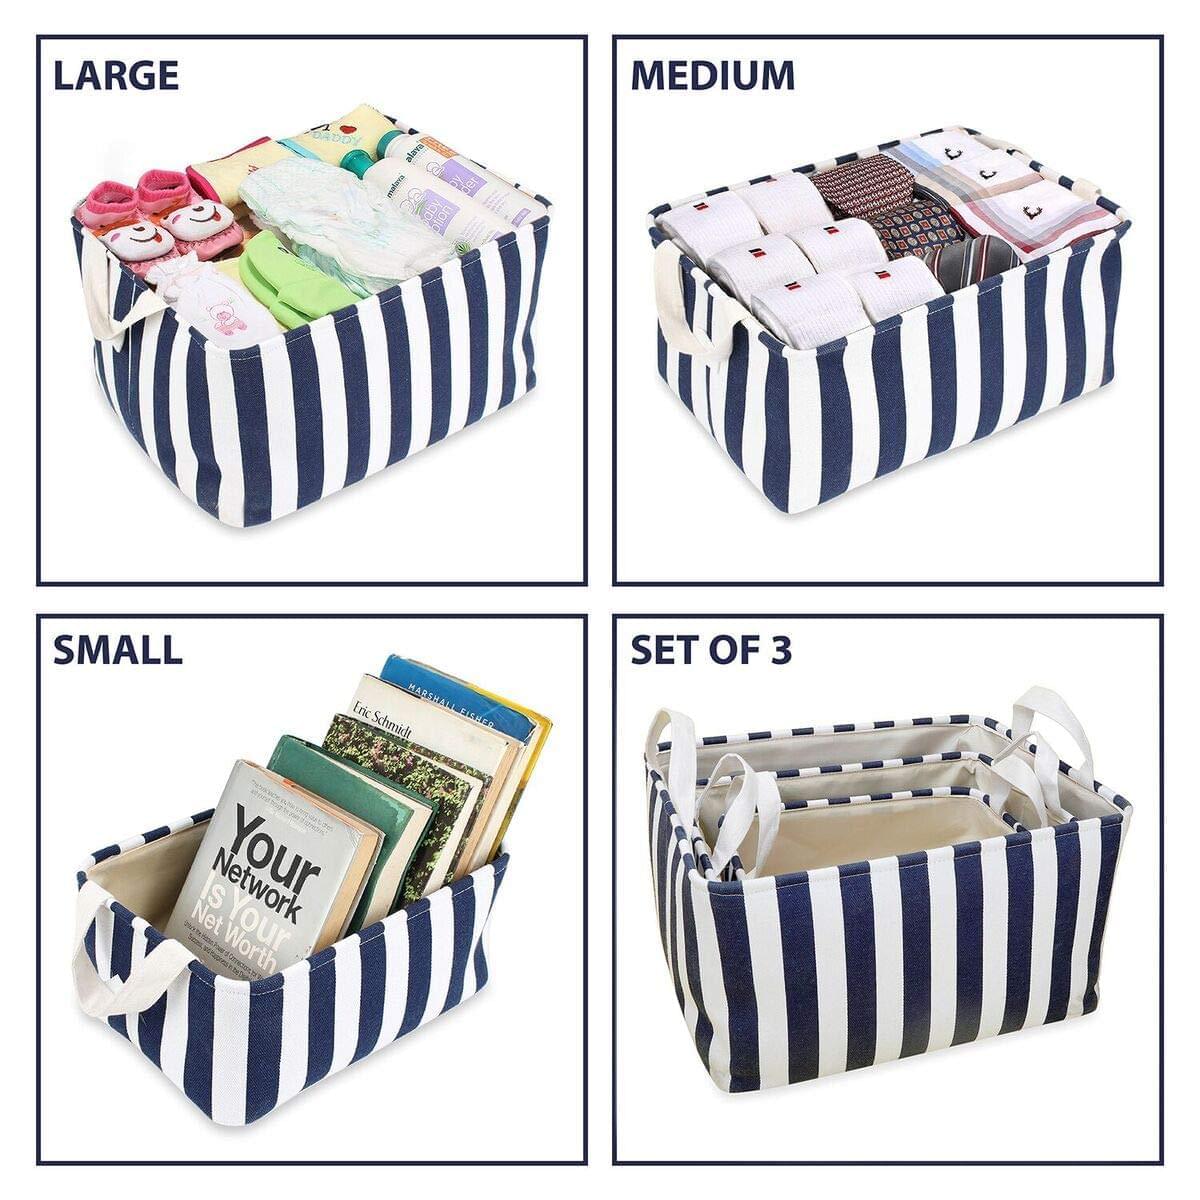 Greecart Cotton Storage Organizer Basket Bin for Clothes Foldable, Toys, Books and Wardrobe (Pack of 3)